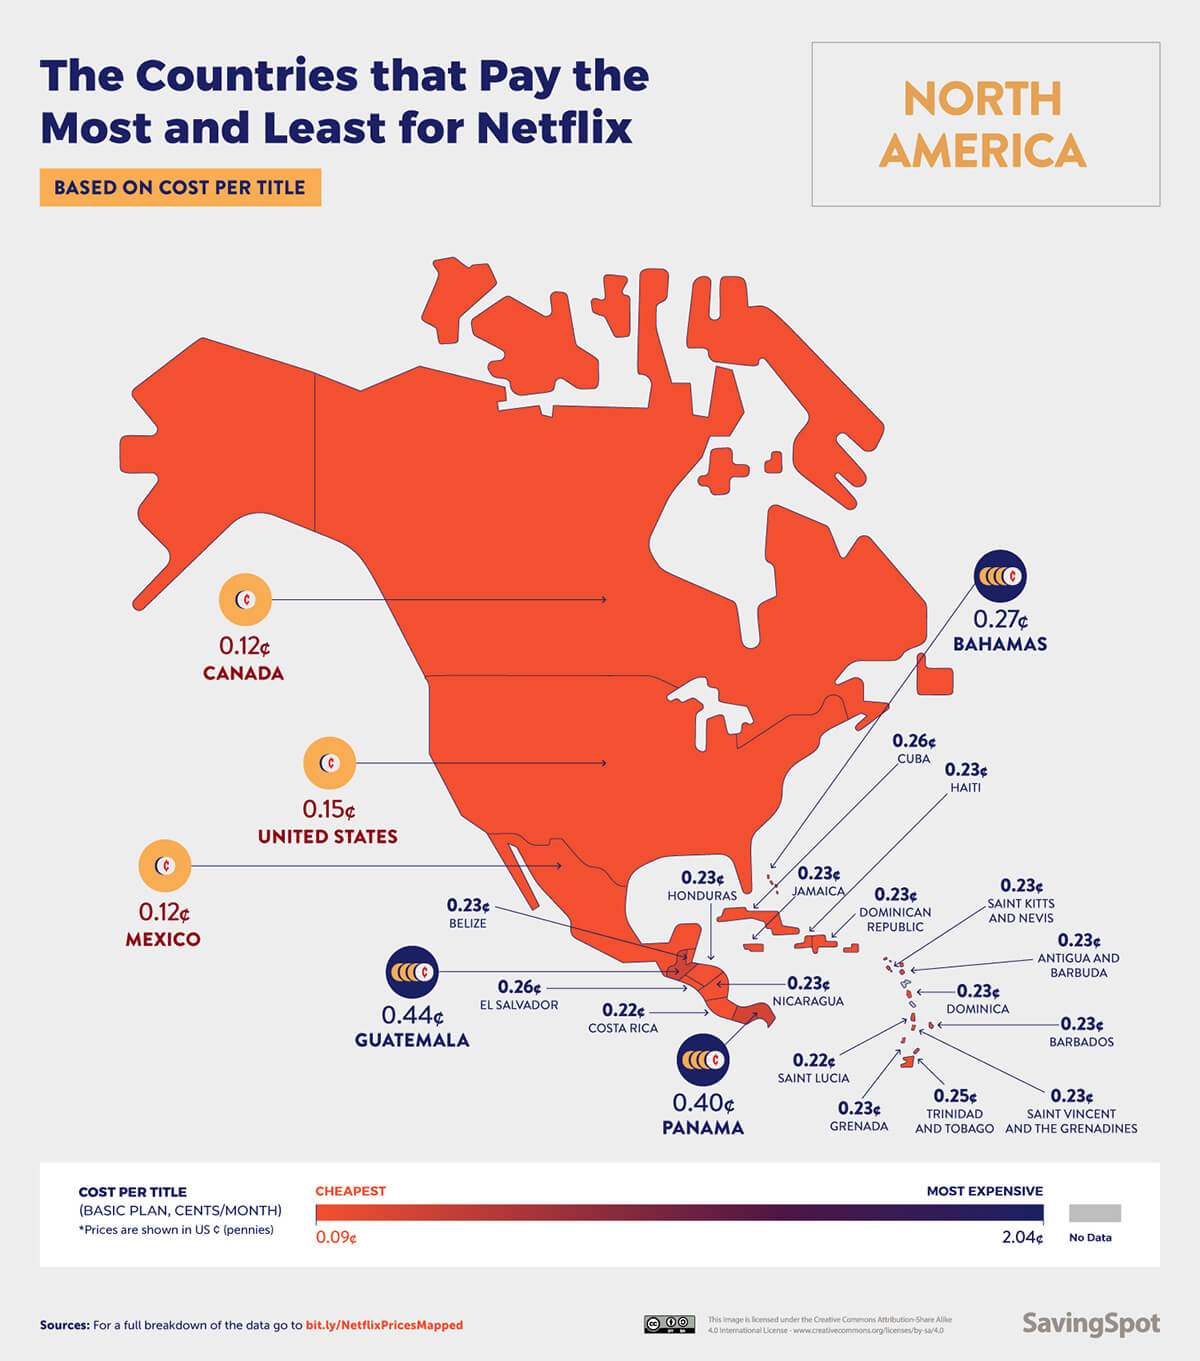 The Cost-per-title of Netflix in North America